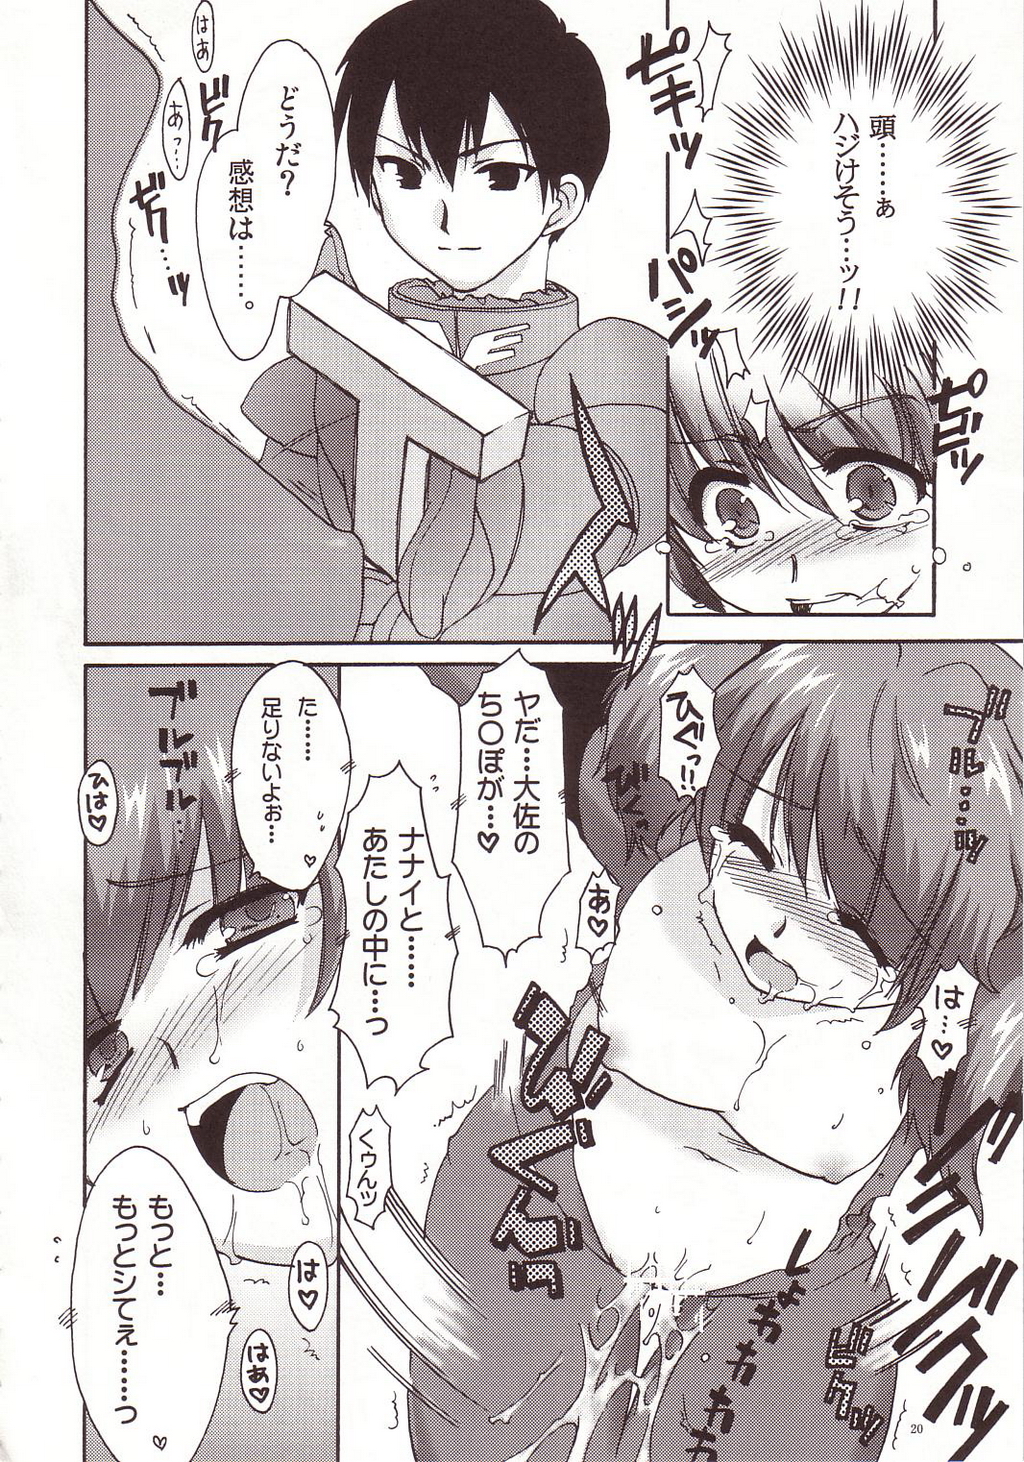 [AKABEi SOFT (Alpha)] Aishitai I WANT TO LOVE (Mobile Suit Gundam Char's Counterattack) page 19 full